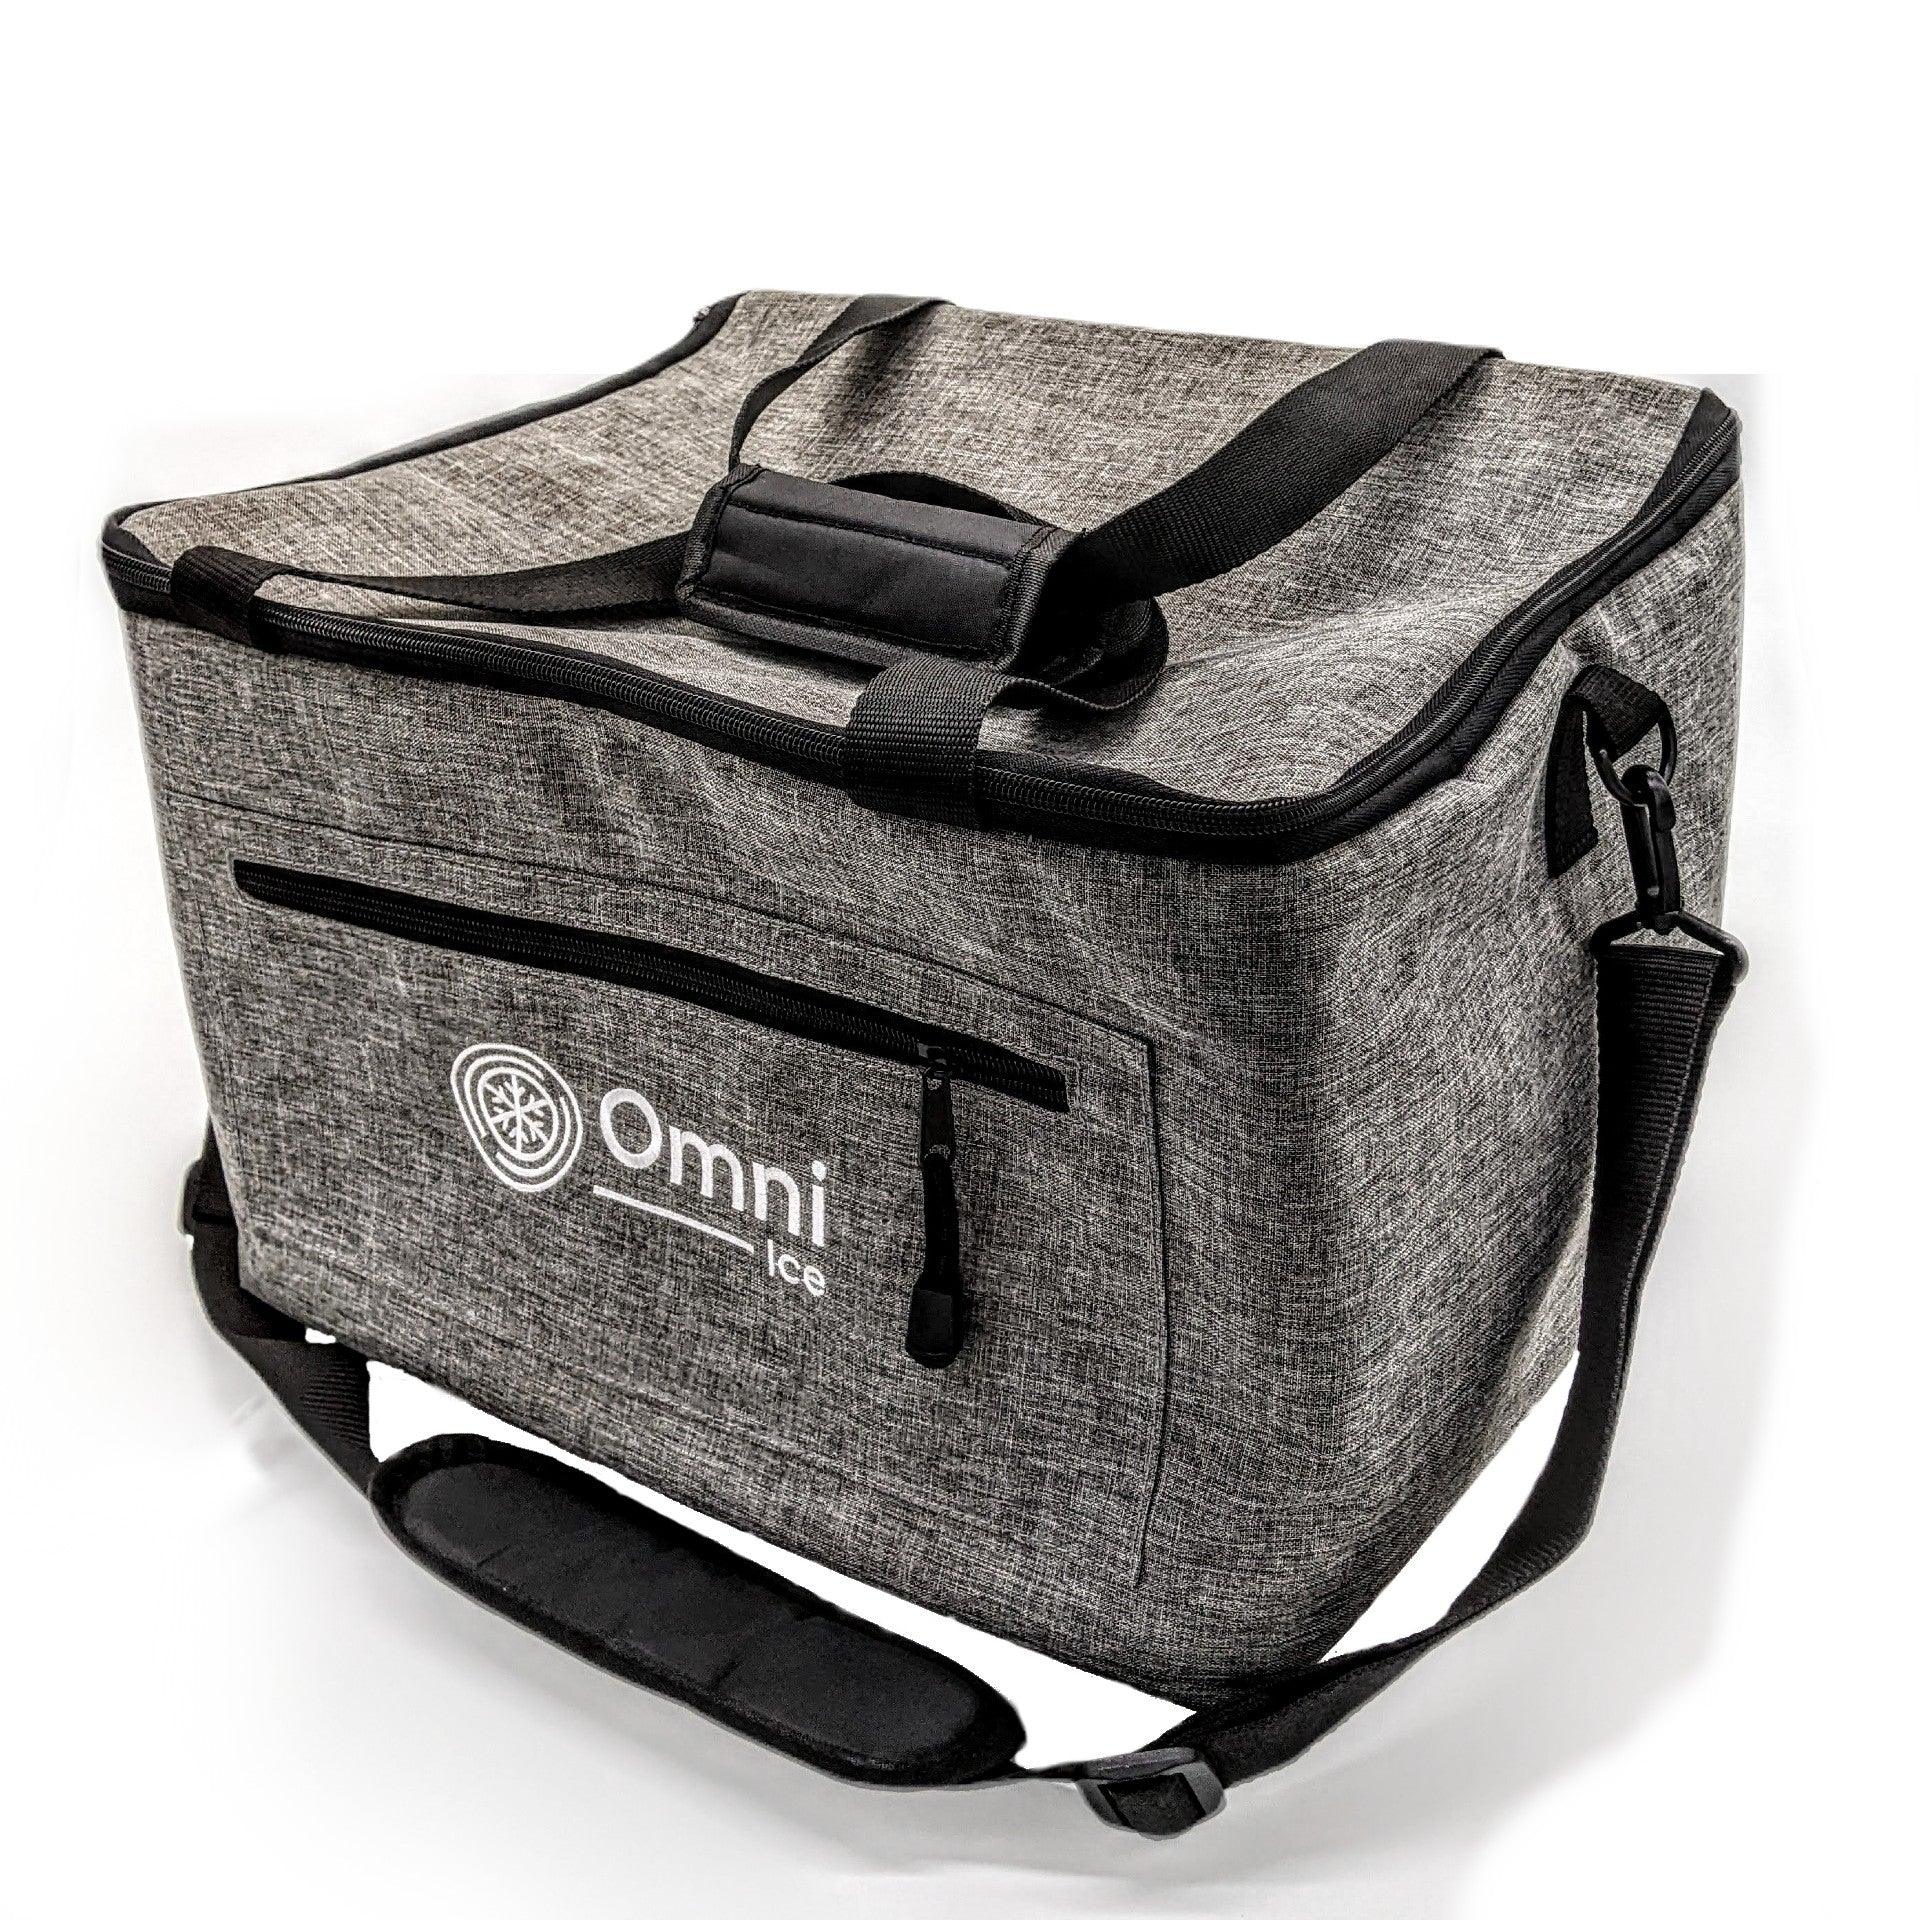 Omni Ice Cold Therapy Multi-Use Travel Portable Carry Bag - OI-1001 Omni Ice Cold Therapy Multi-Use Travel Portable Carry Bag - undefined by Supply Physical Therapy Accessories, Aircast Accessories, Breg, Breg Accessories, Breg Polar Care Wave, Breg Wave Accessories, Classic3 Accessories, Clear3, Clear3 Accessories, Cub Accessories, Cube, Cube Accessories, Donjoy Accessories, Glacier Accessories, Kodiak, Kodiak Accessories, Replacement